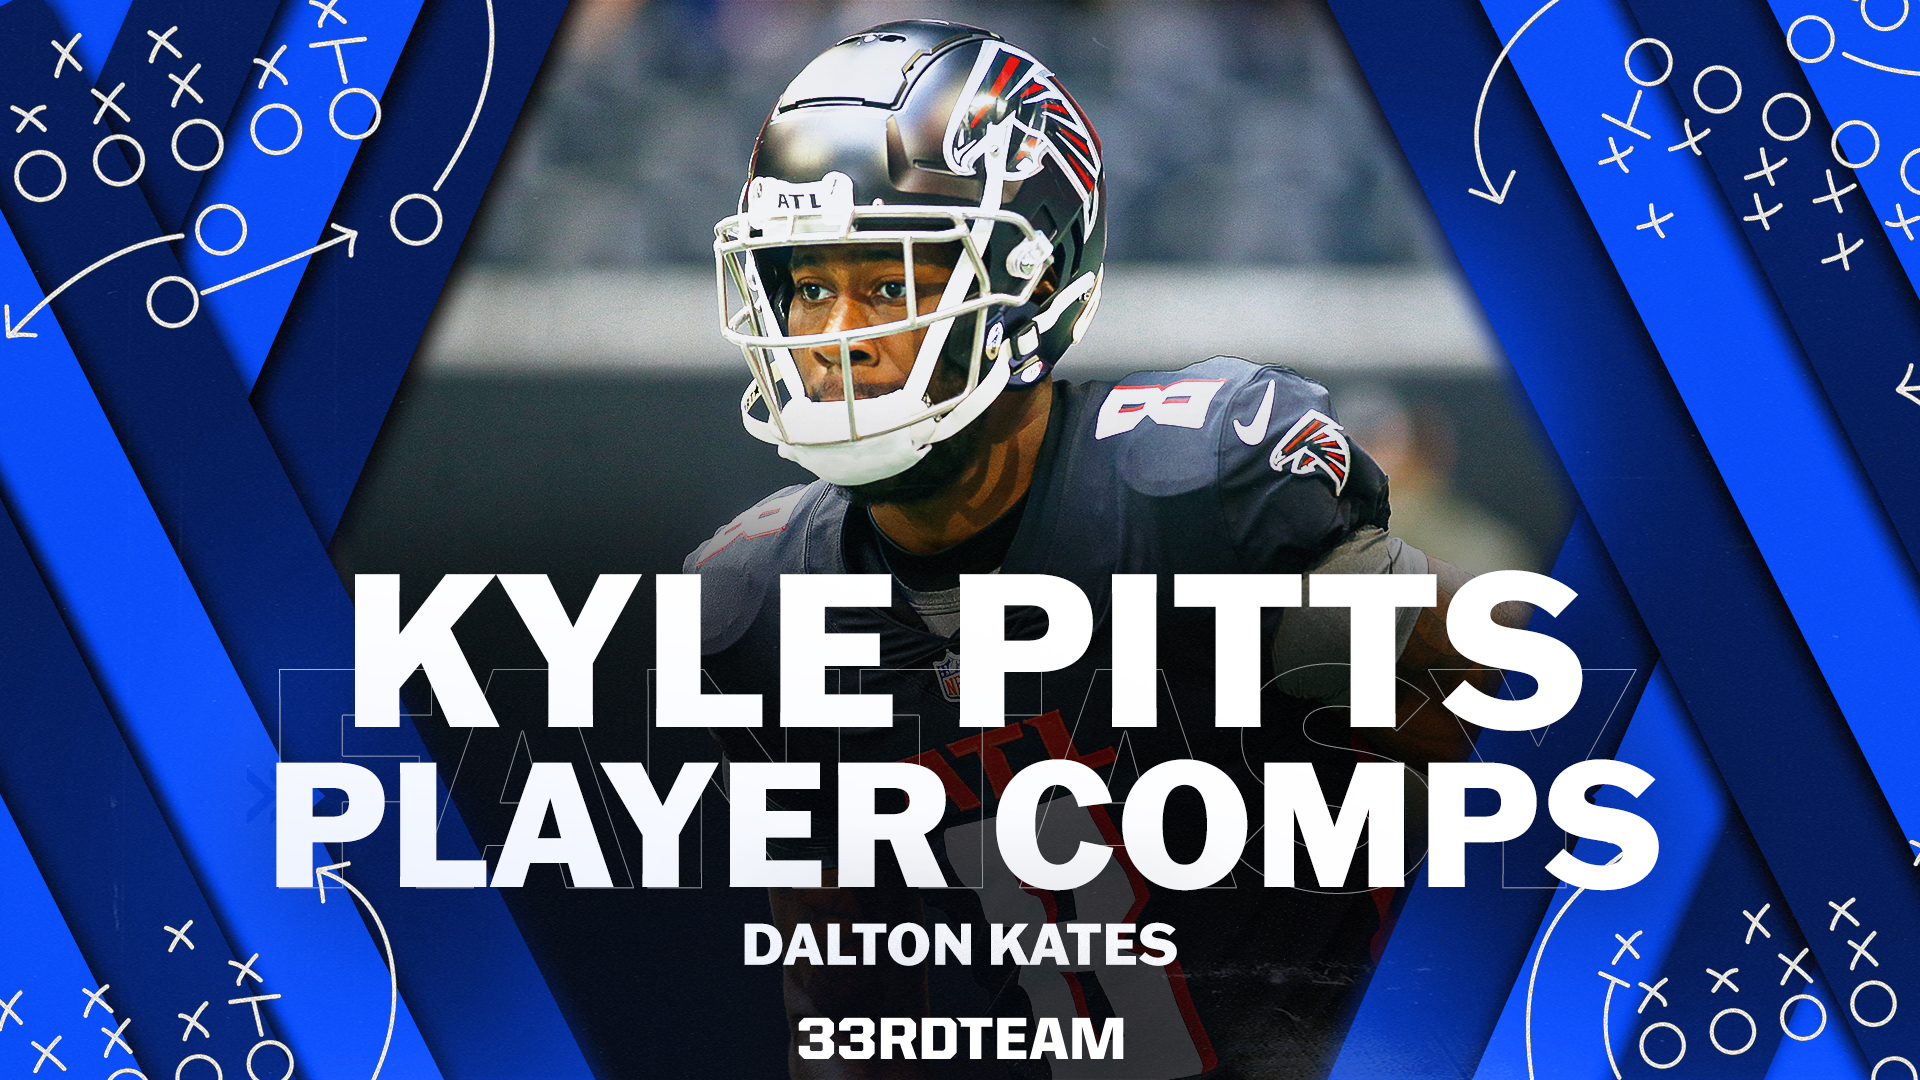 2023 Dynasty Fantasy Football: Falcons’ Kyle Pitts Has Surprising Player Comps